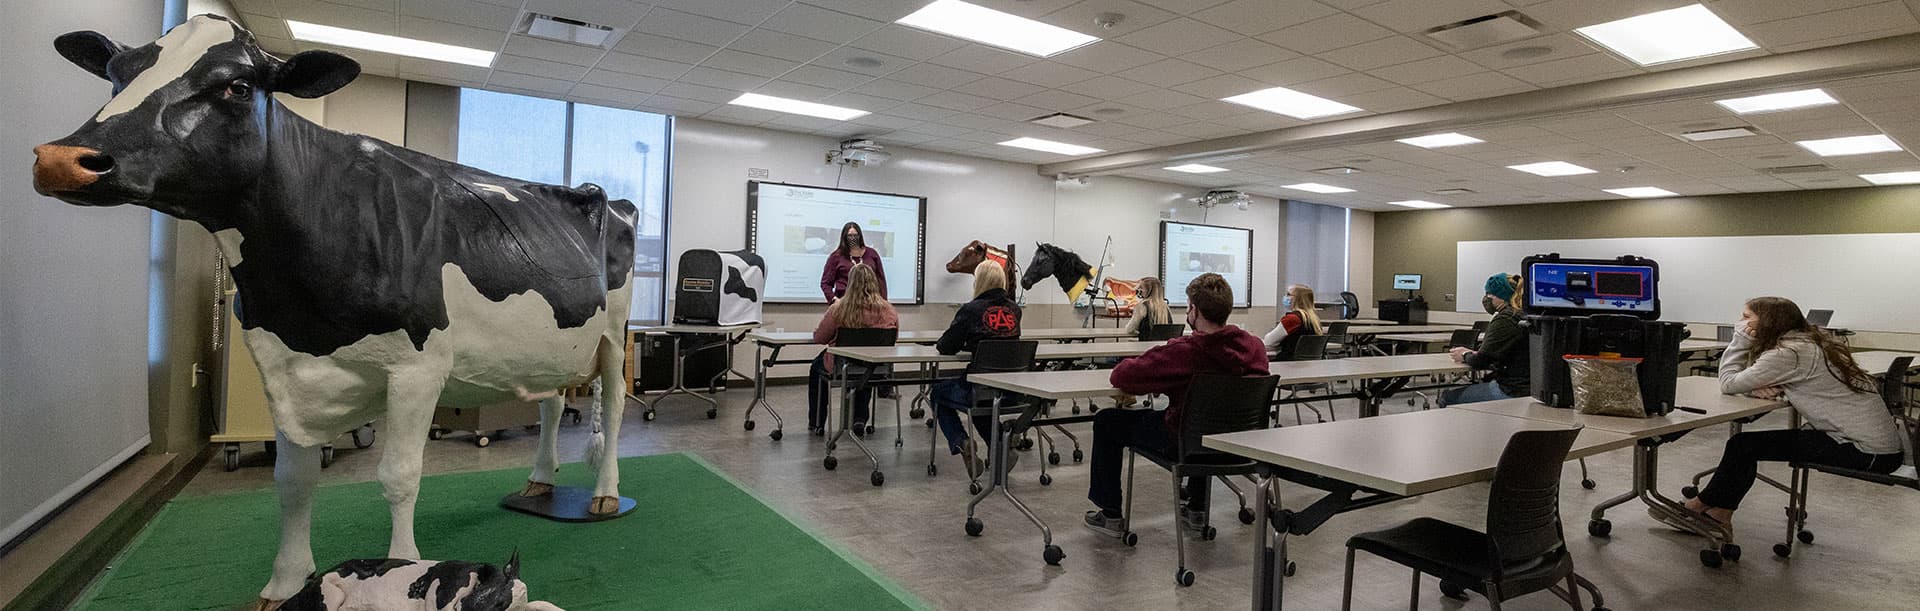 students in agriculture classroom with cow simulator